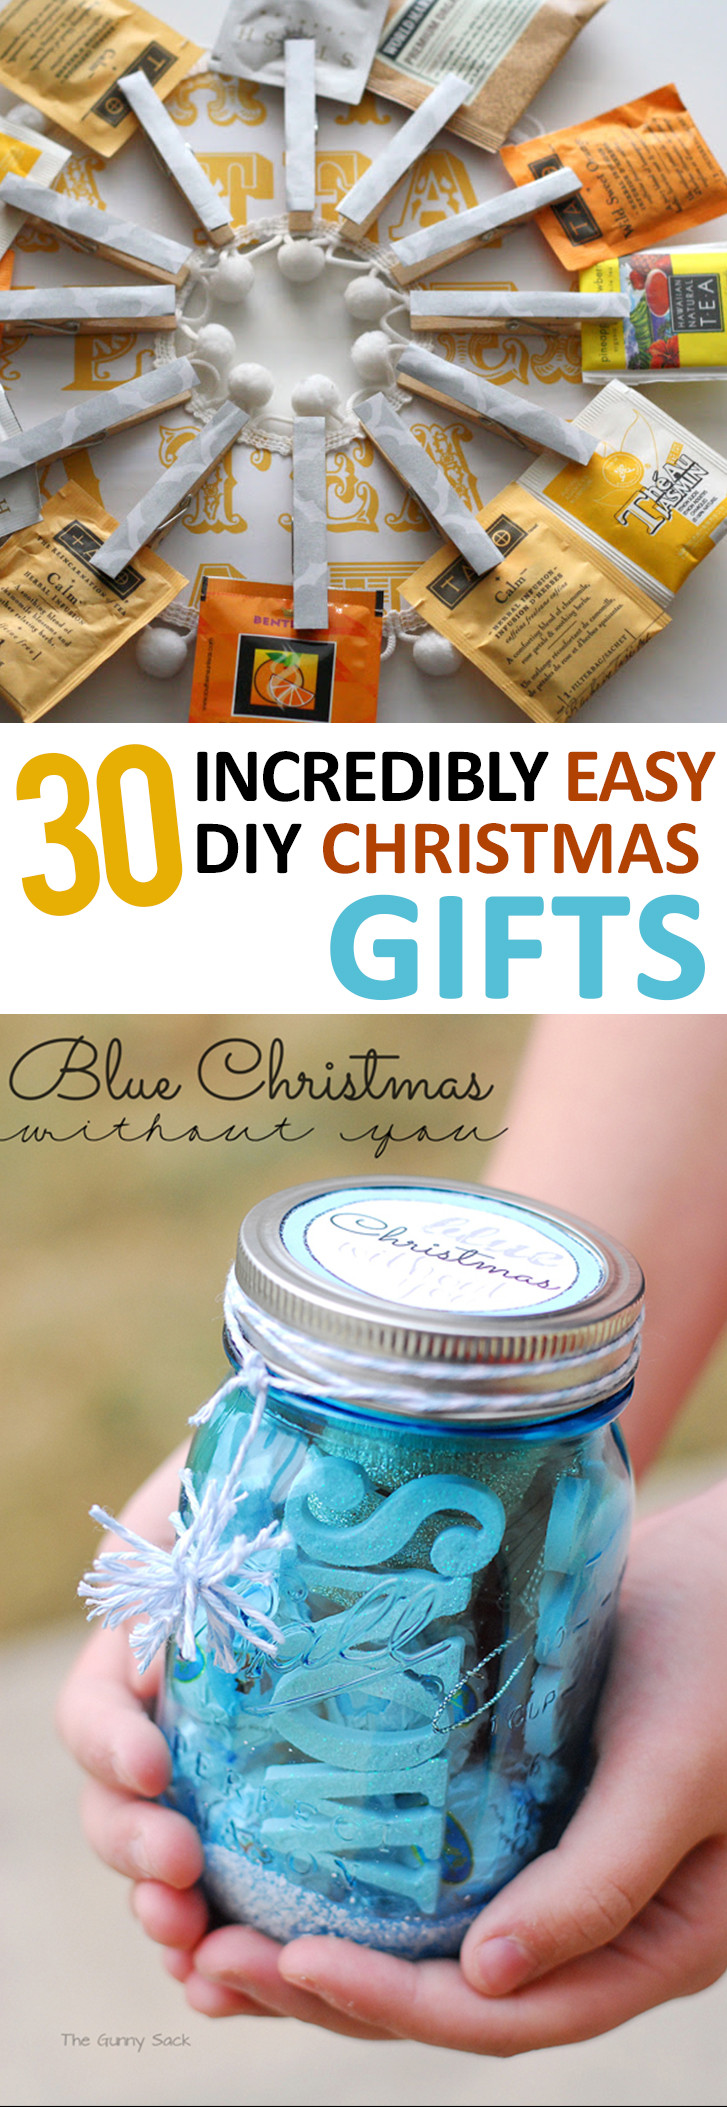 DIY Christmas Gifts Videos
 30 Incredibly Easy DIY Christmas Gifts – Sunlit Spaces